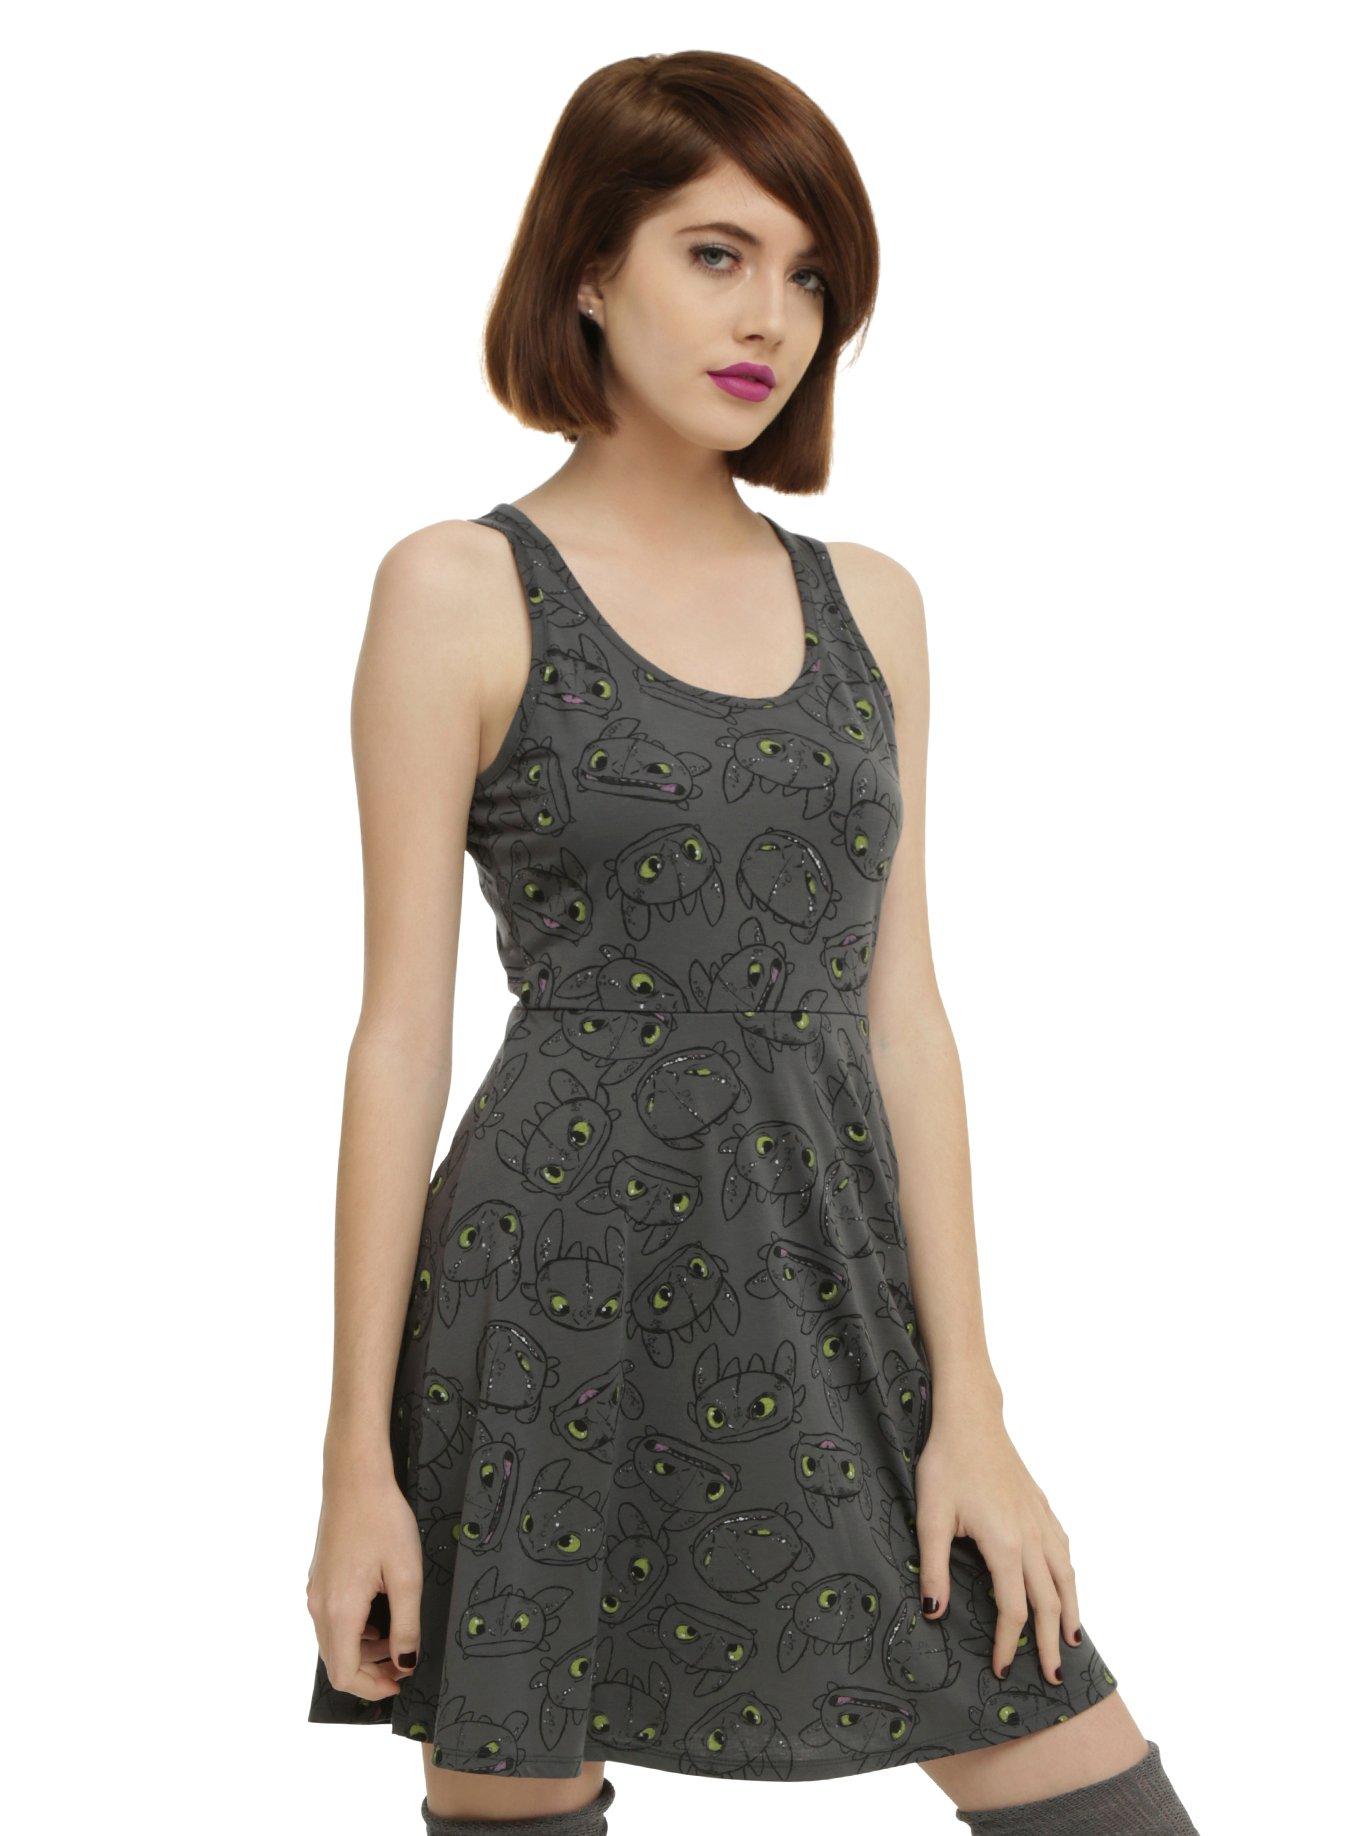 How To Train Your Dragon Toothless Dress | Hot Topic